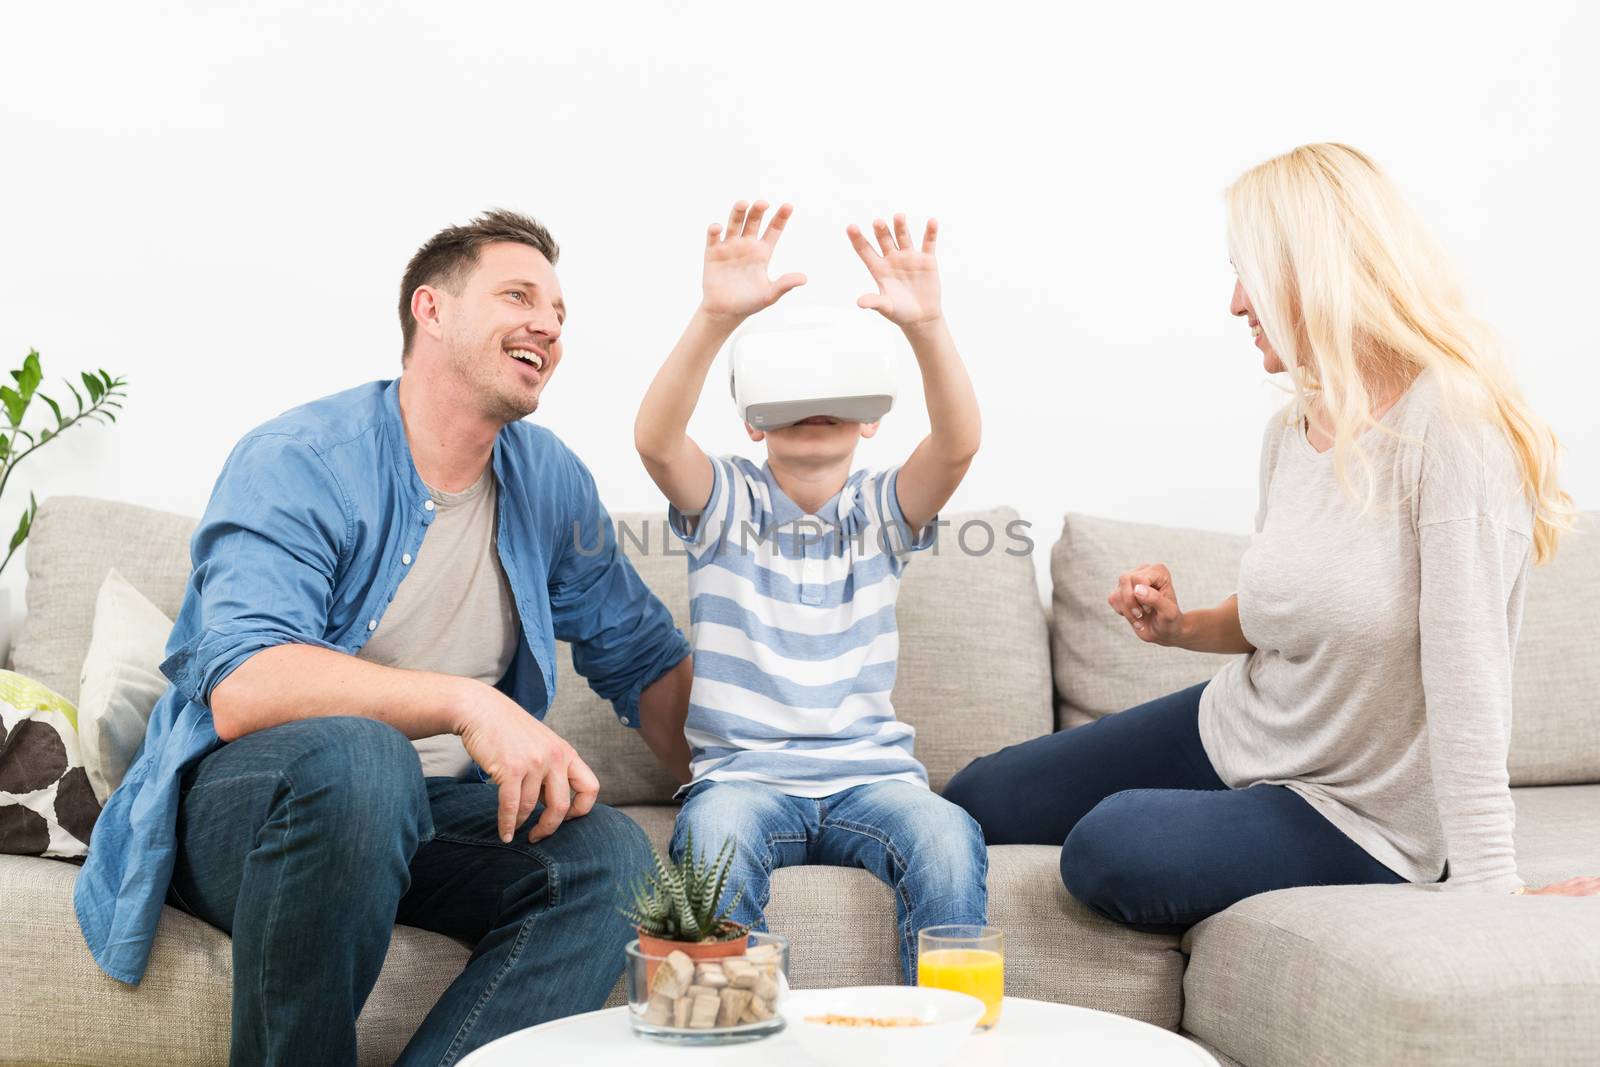 Happy caucasian family at home on living room sofa having fun playing games using virtual reality headset.